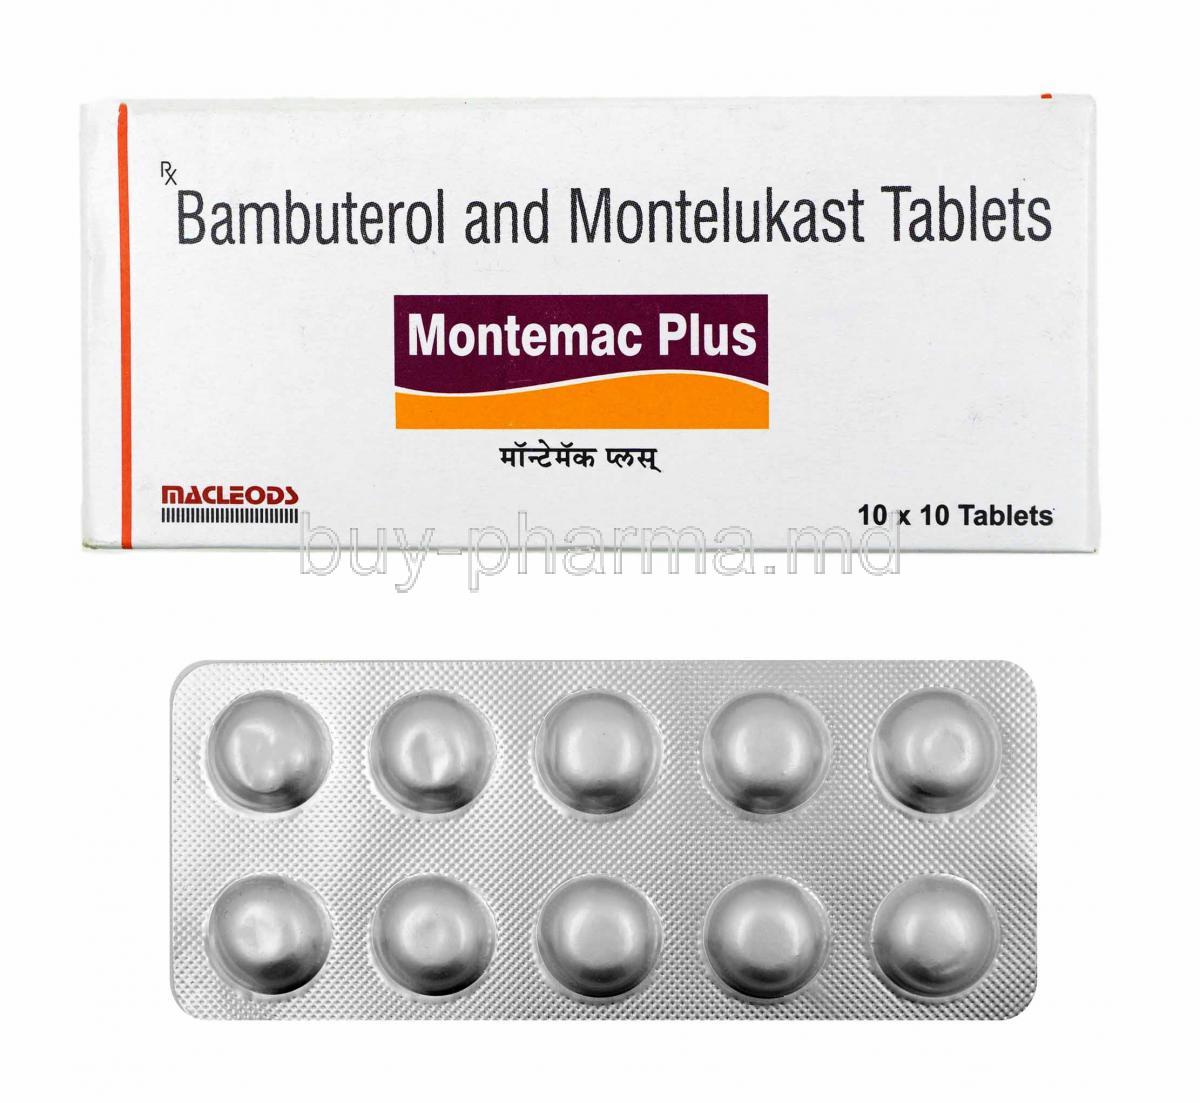 Montemac Plus, Bambuterol and Montelukast box and tablets